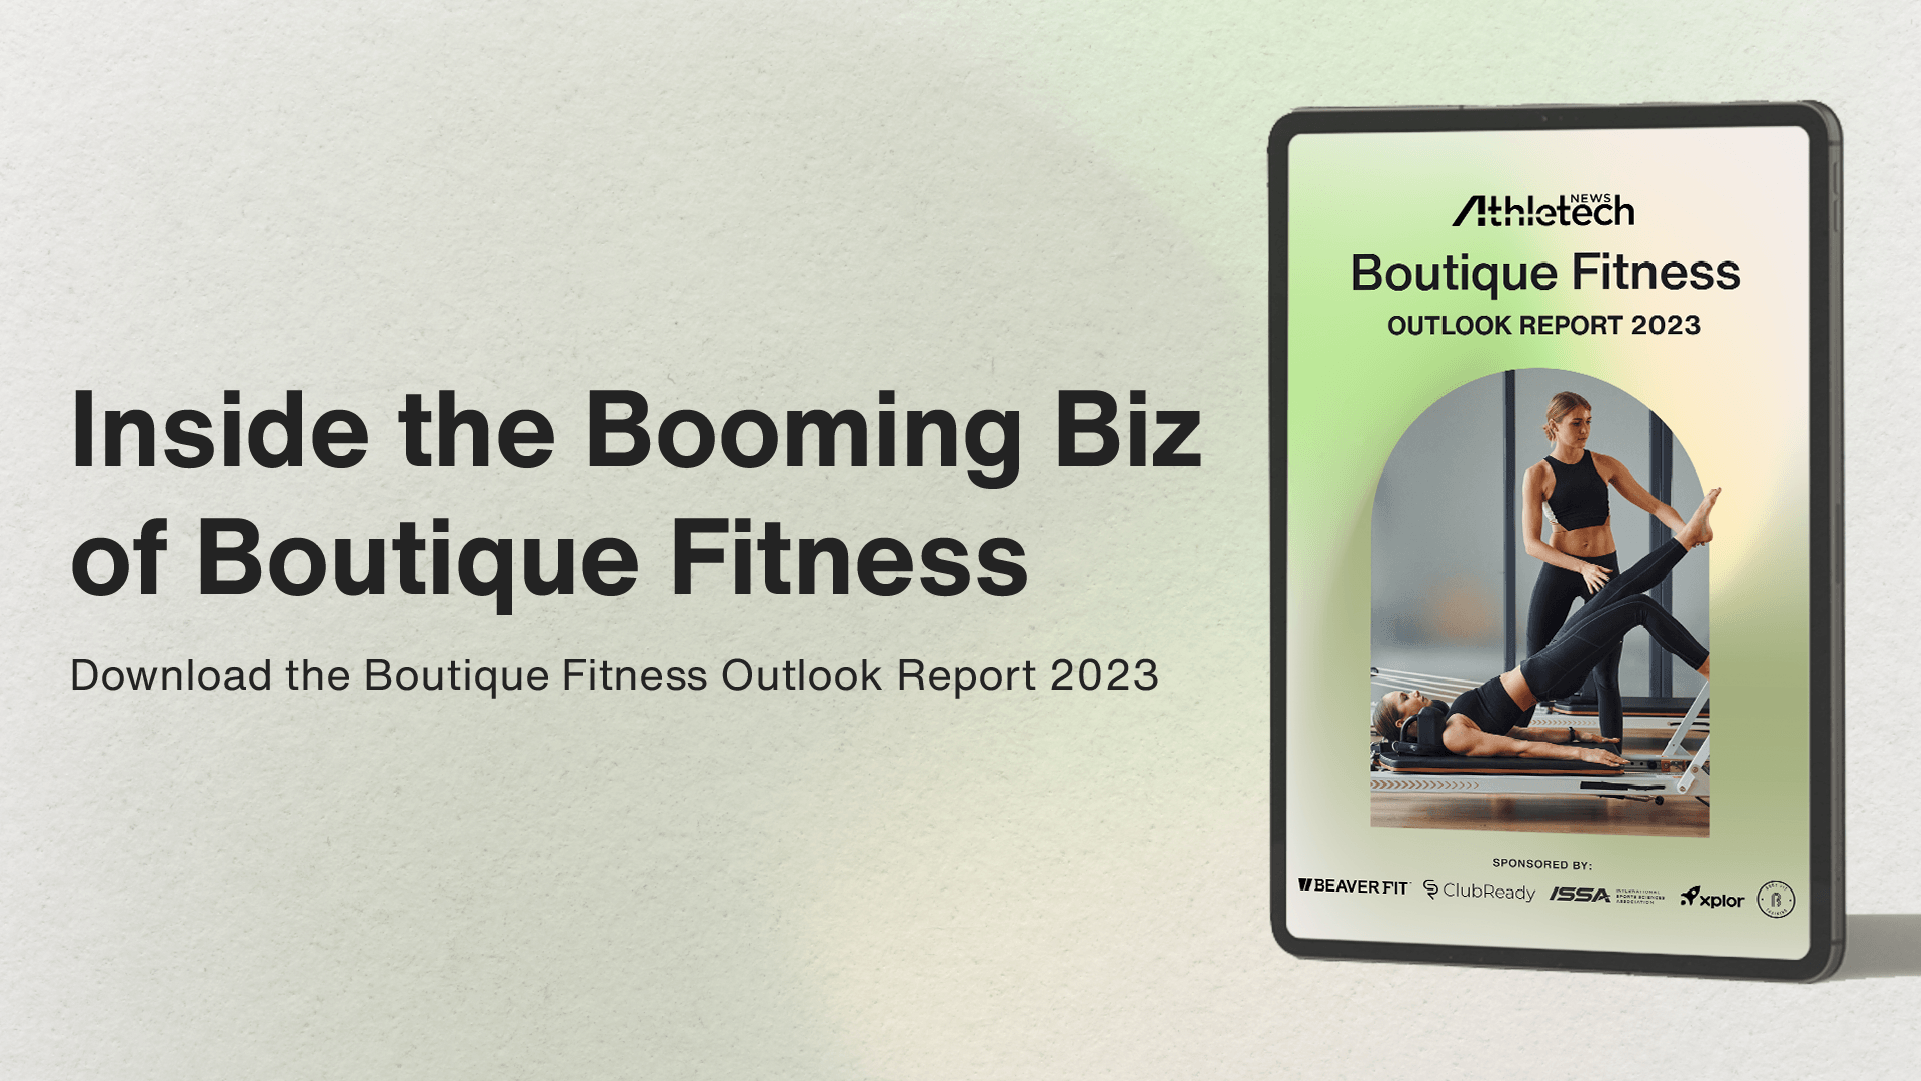 Athletech Boutique Fitness Outlook Report